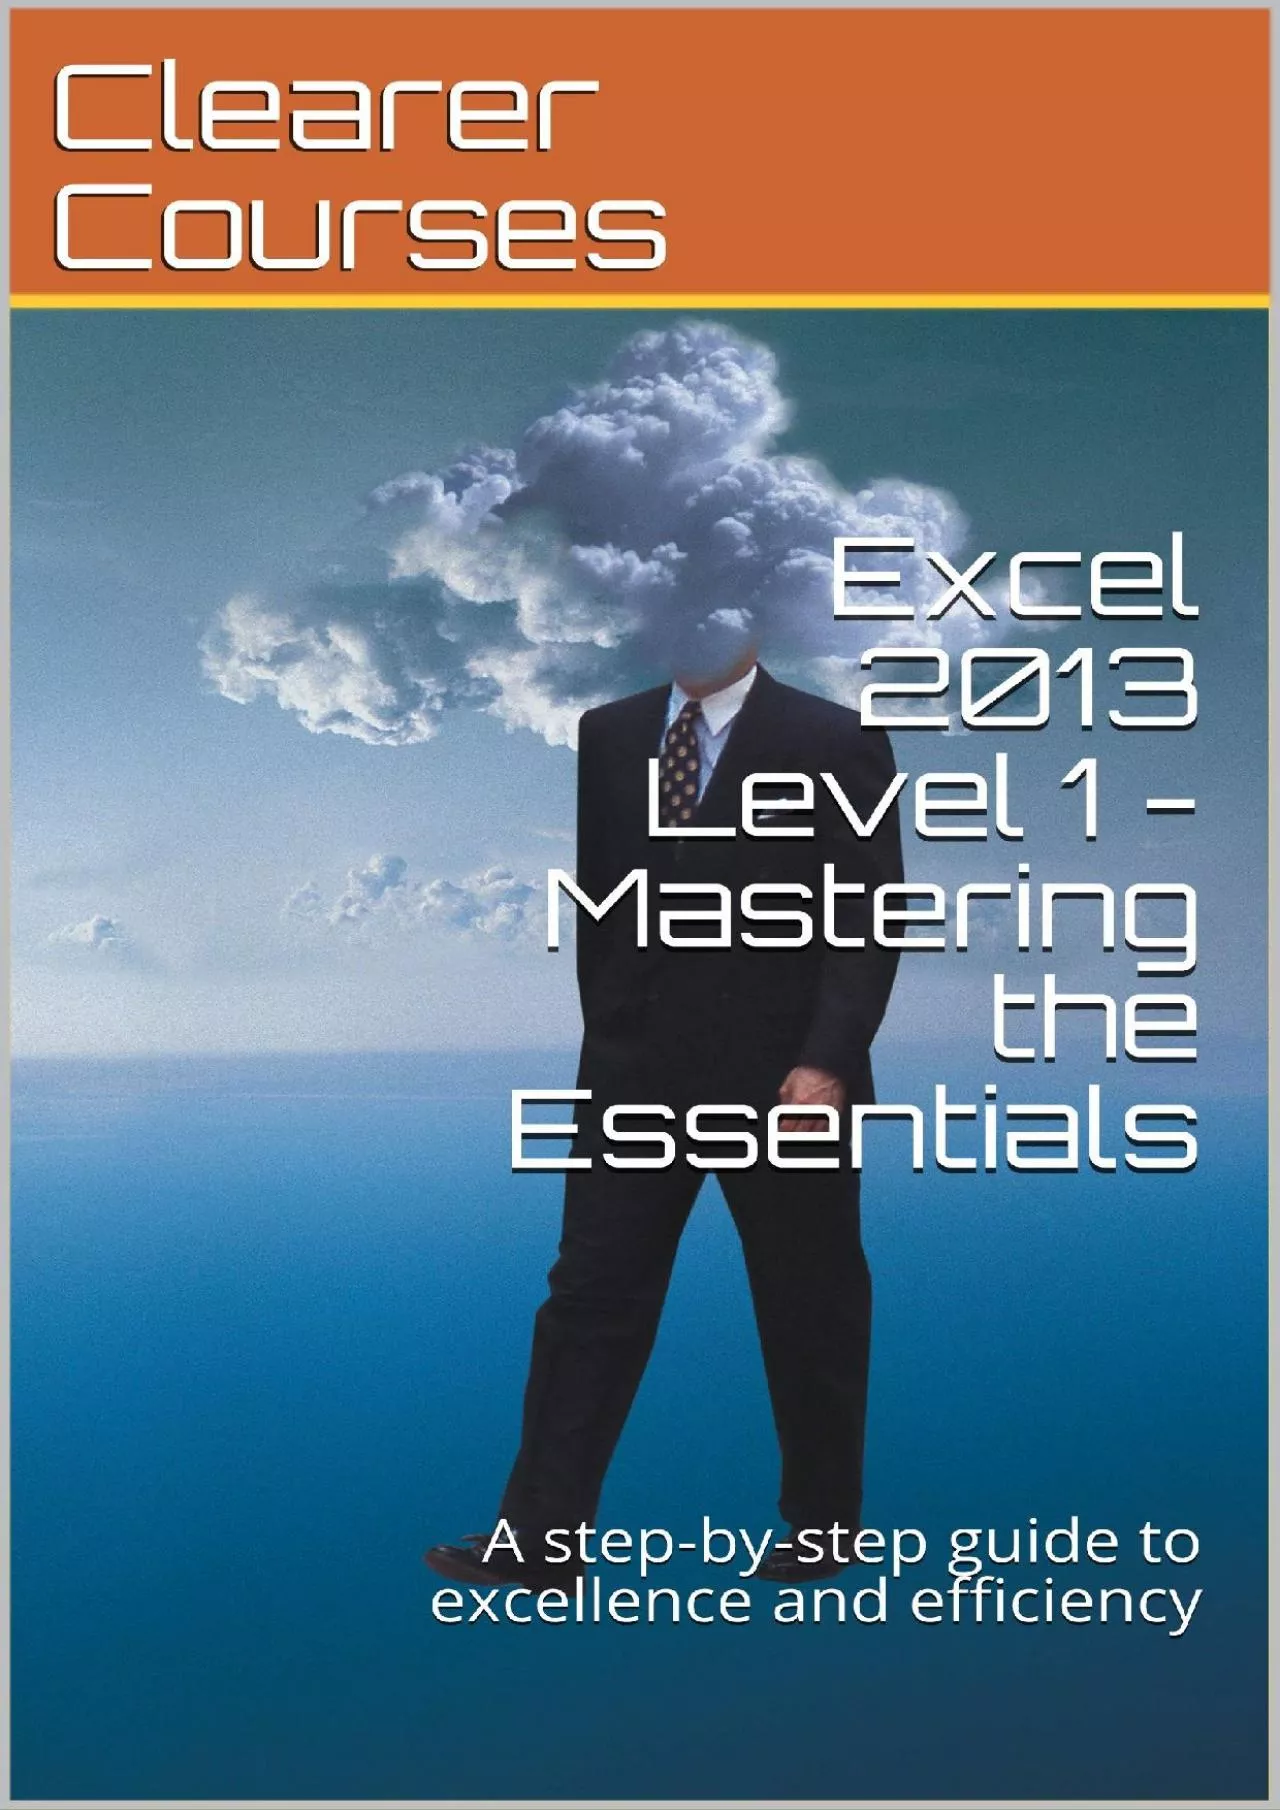 (BOOK)-Excel 2013 Level 1 - Mastering the Essentials: A step-by-step guide to confident